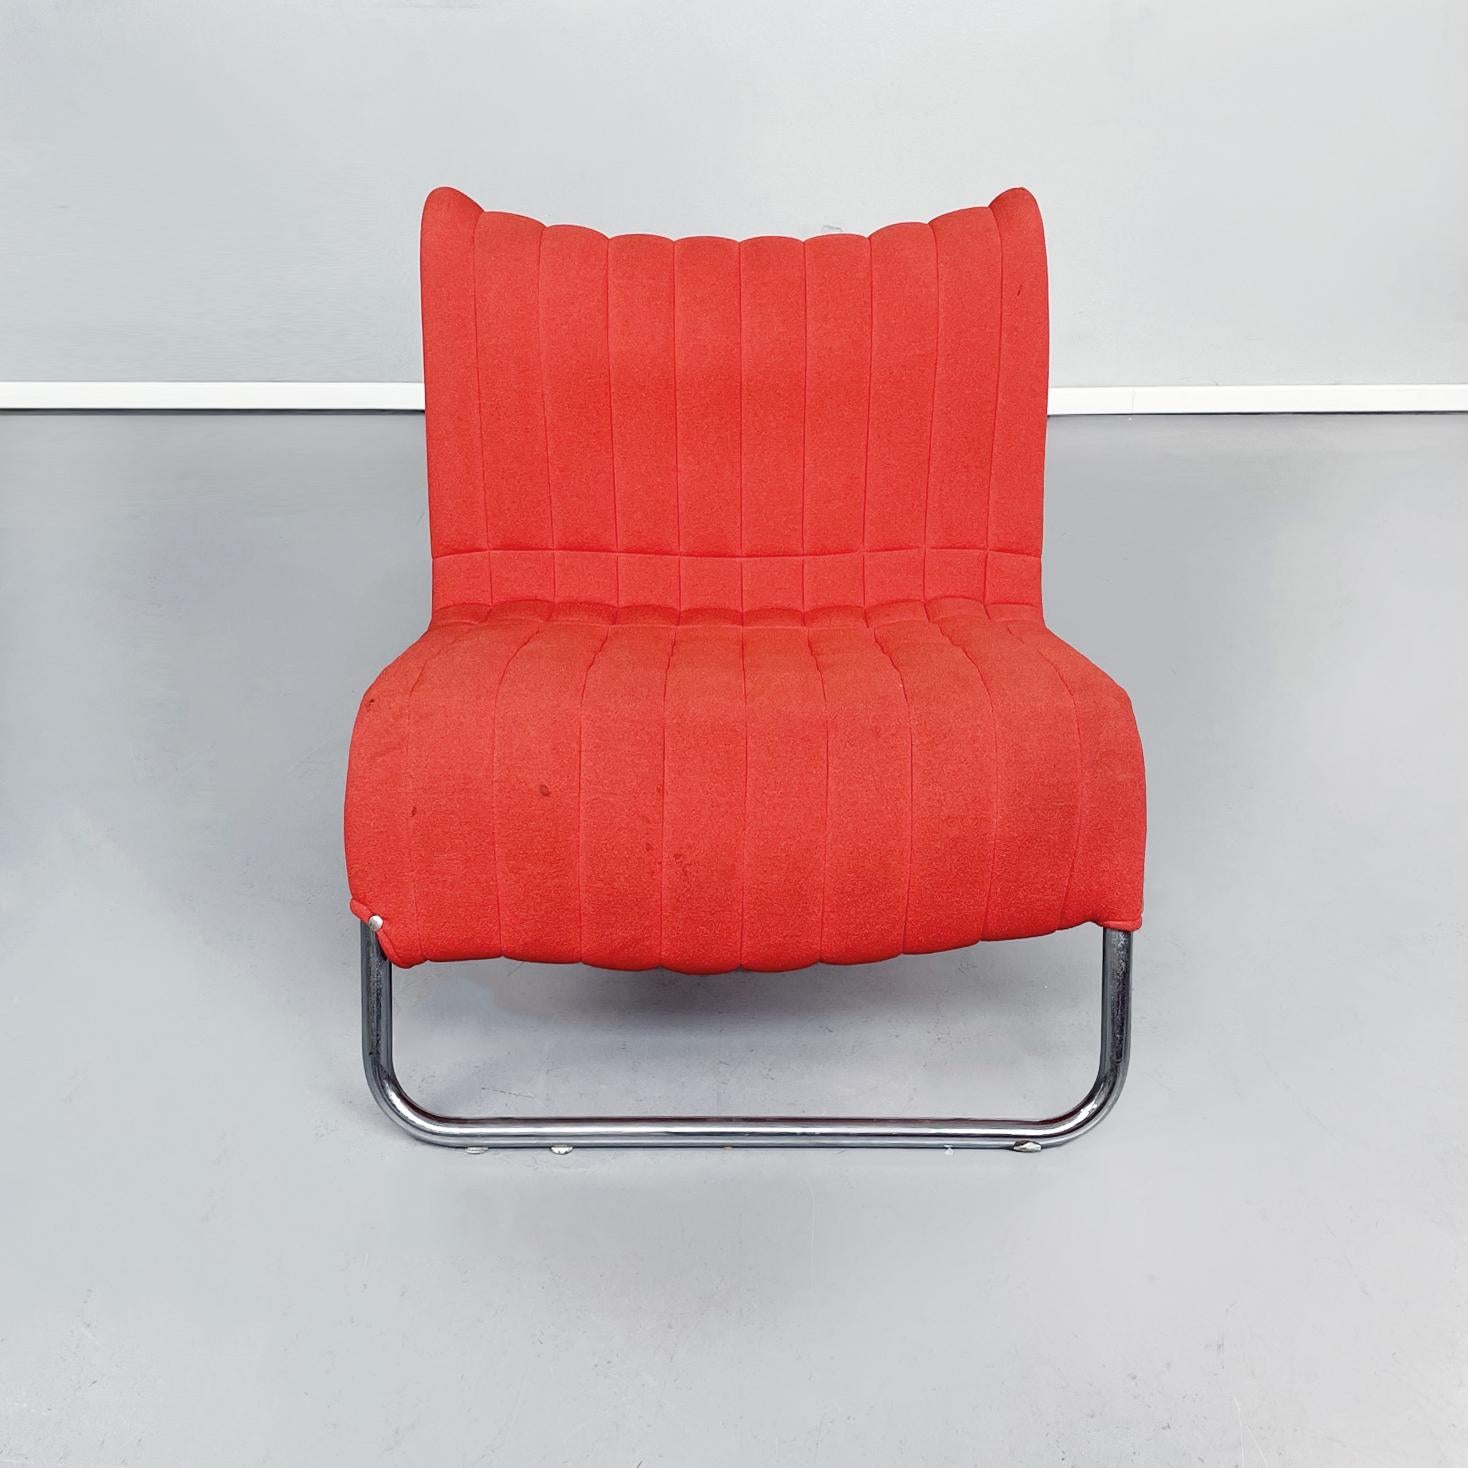 Italian Armchair and footrest Due Cavalli by De Pas, D’Urbino and Lomazzi for Driade, 1970s
A set of an armchair and a footstool model Due Cavalli, padded and upholstered in red fabric. The structure of the pouf and of the armchair is in tubular